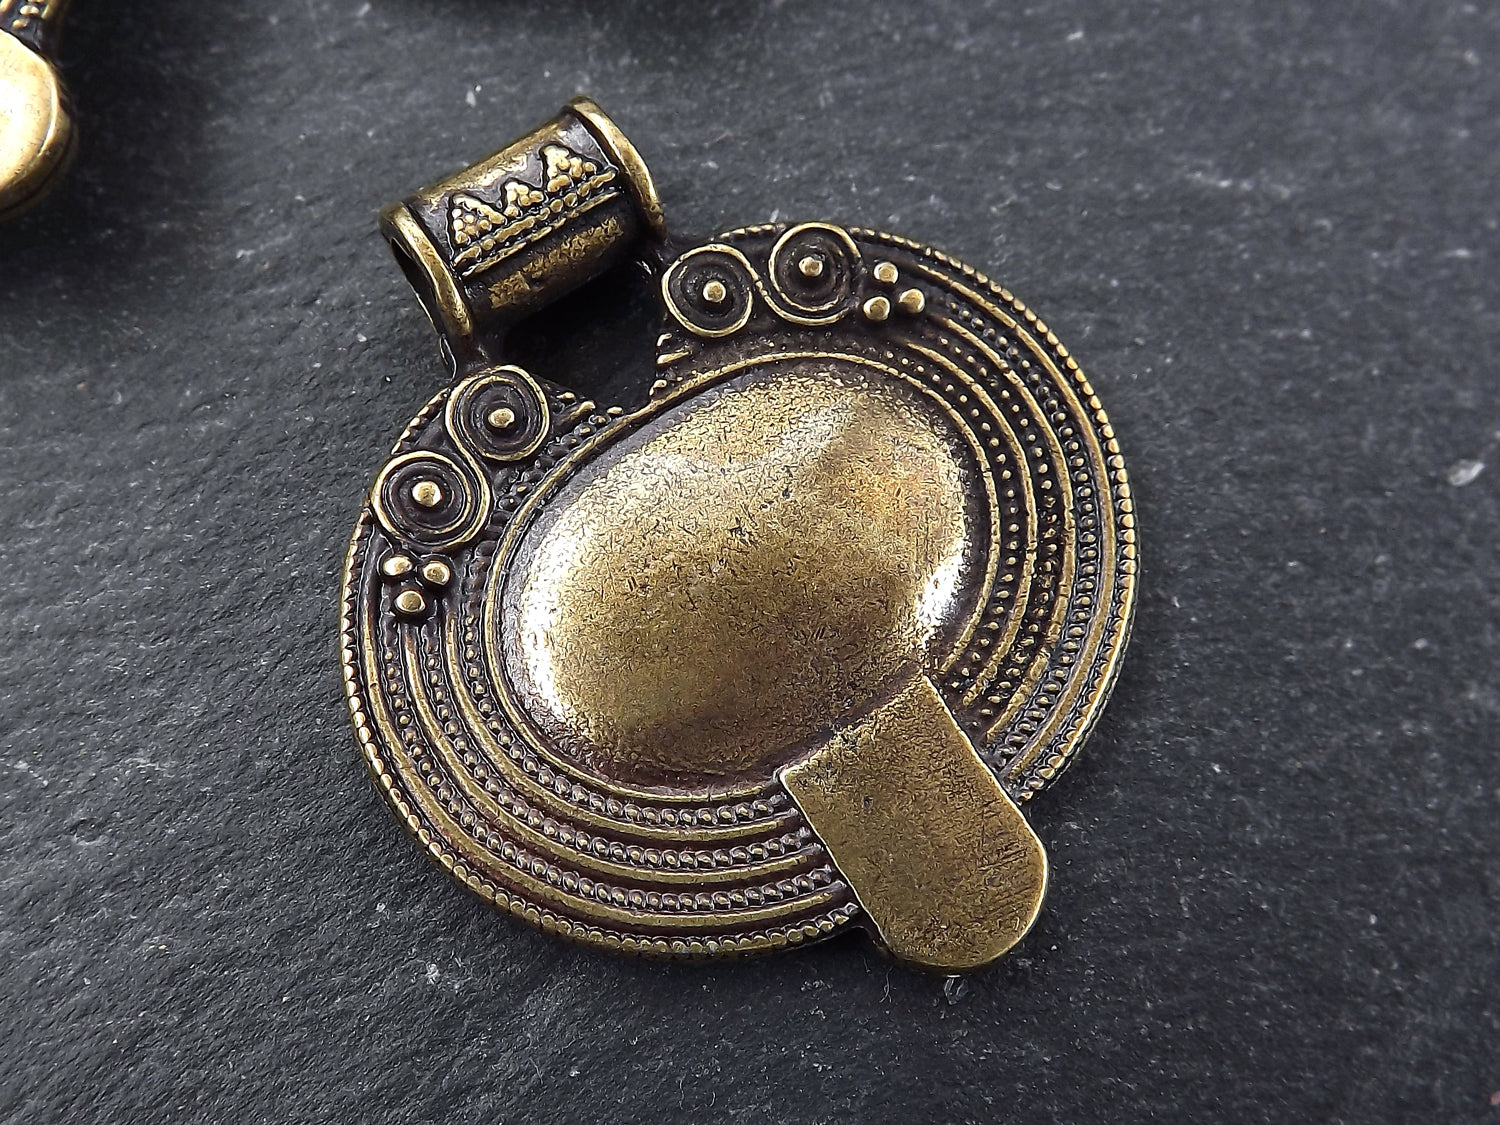 Nepalese Style Oval Artisan Heart Pendant Ethnic Tribal Pattern Rajasthan - Antique Bronze Plated - 1pc